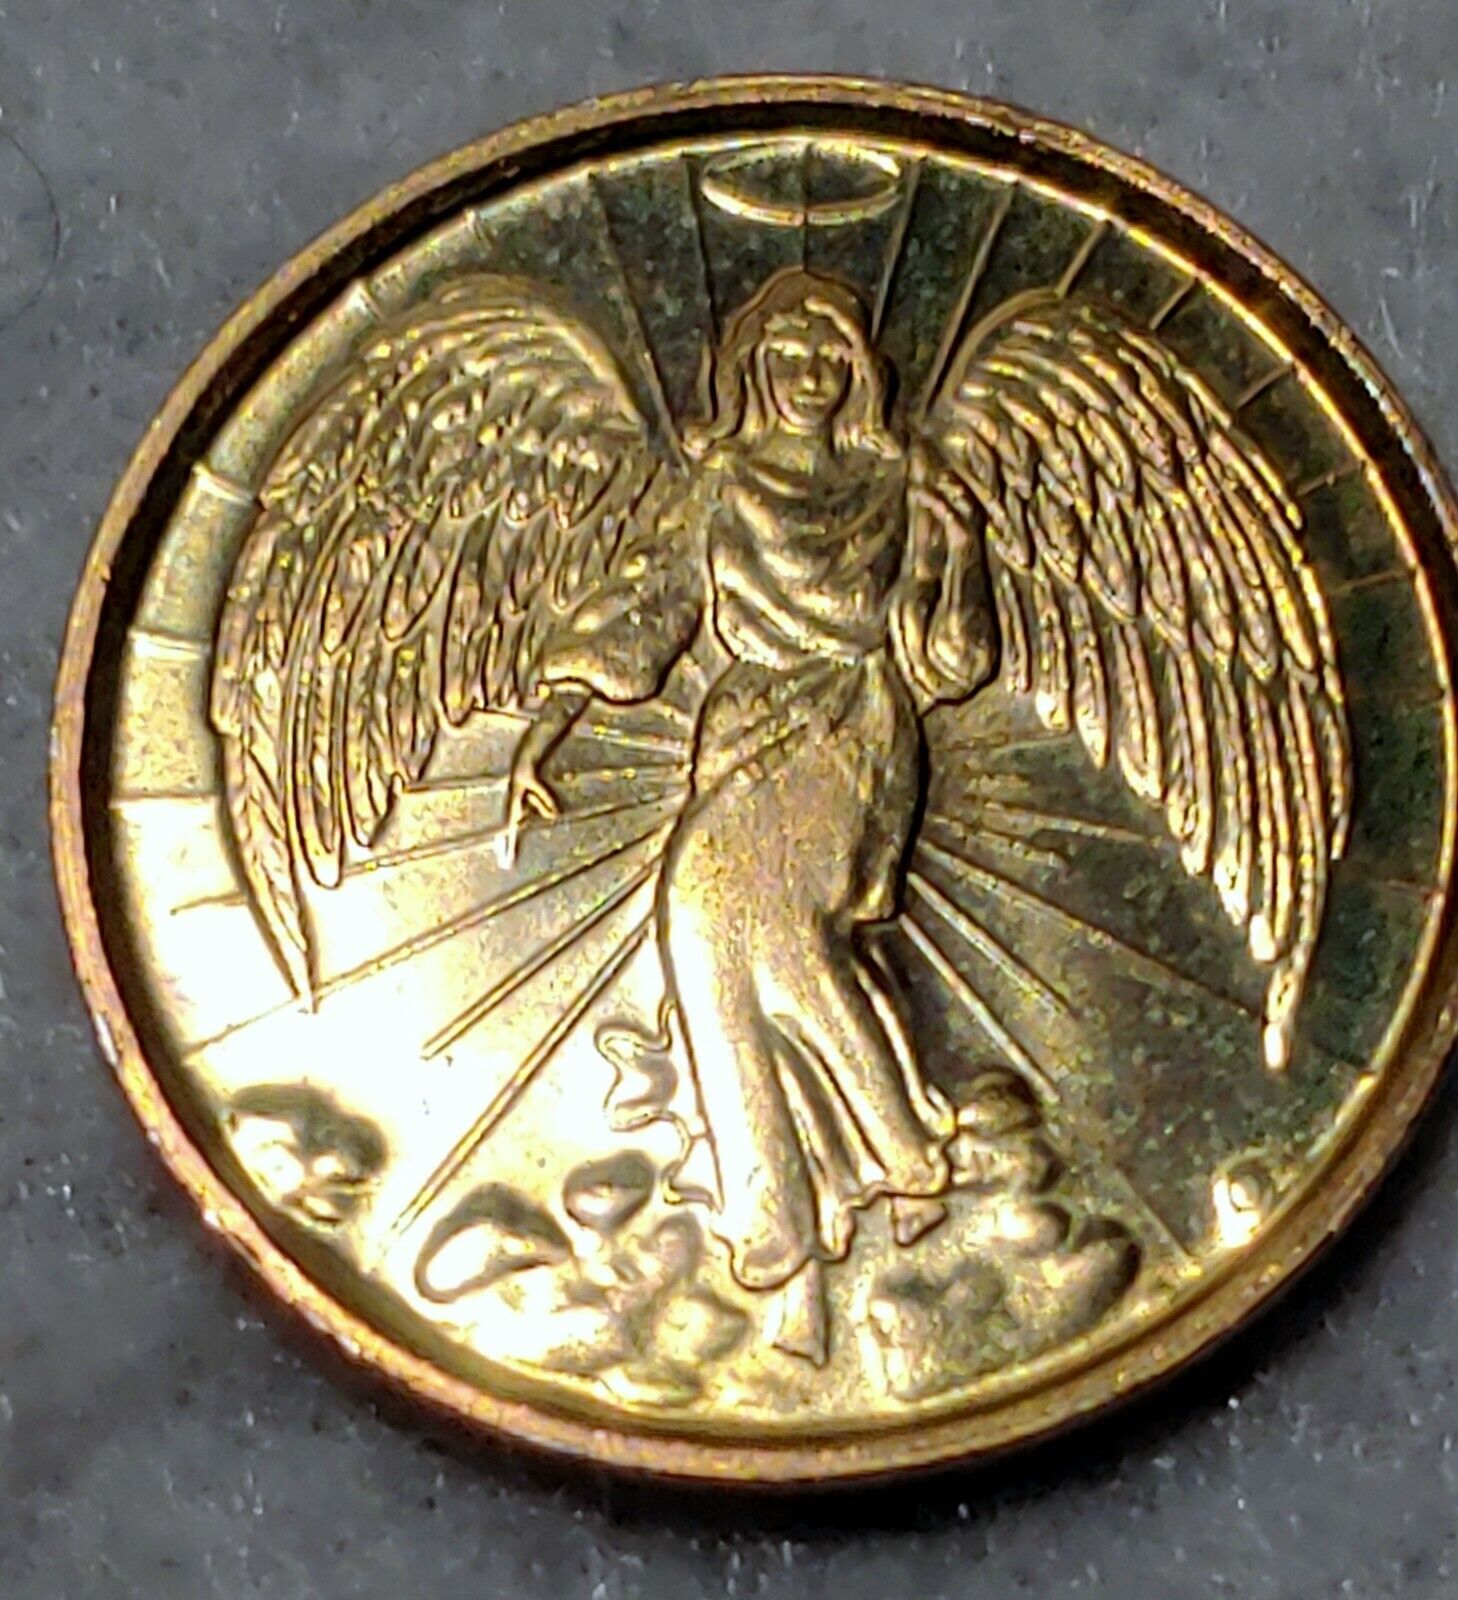 Vtg CHRISTIAN GOLD COLORED RELIGIOUS ANGEL HALO MEDAL Ungraded Circulated